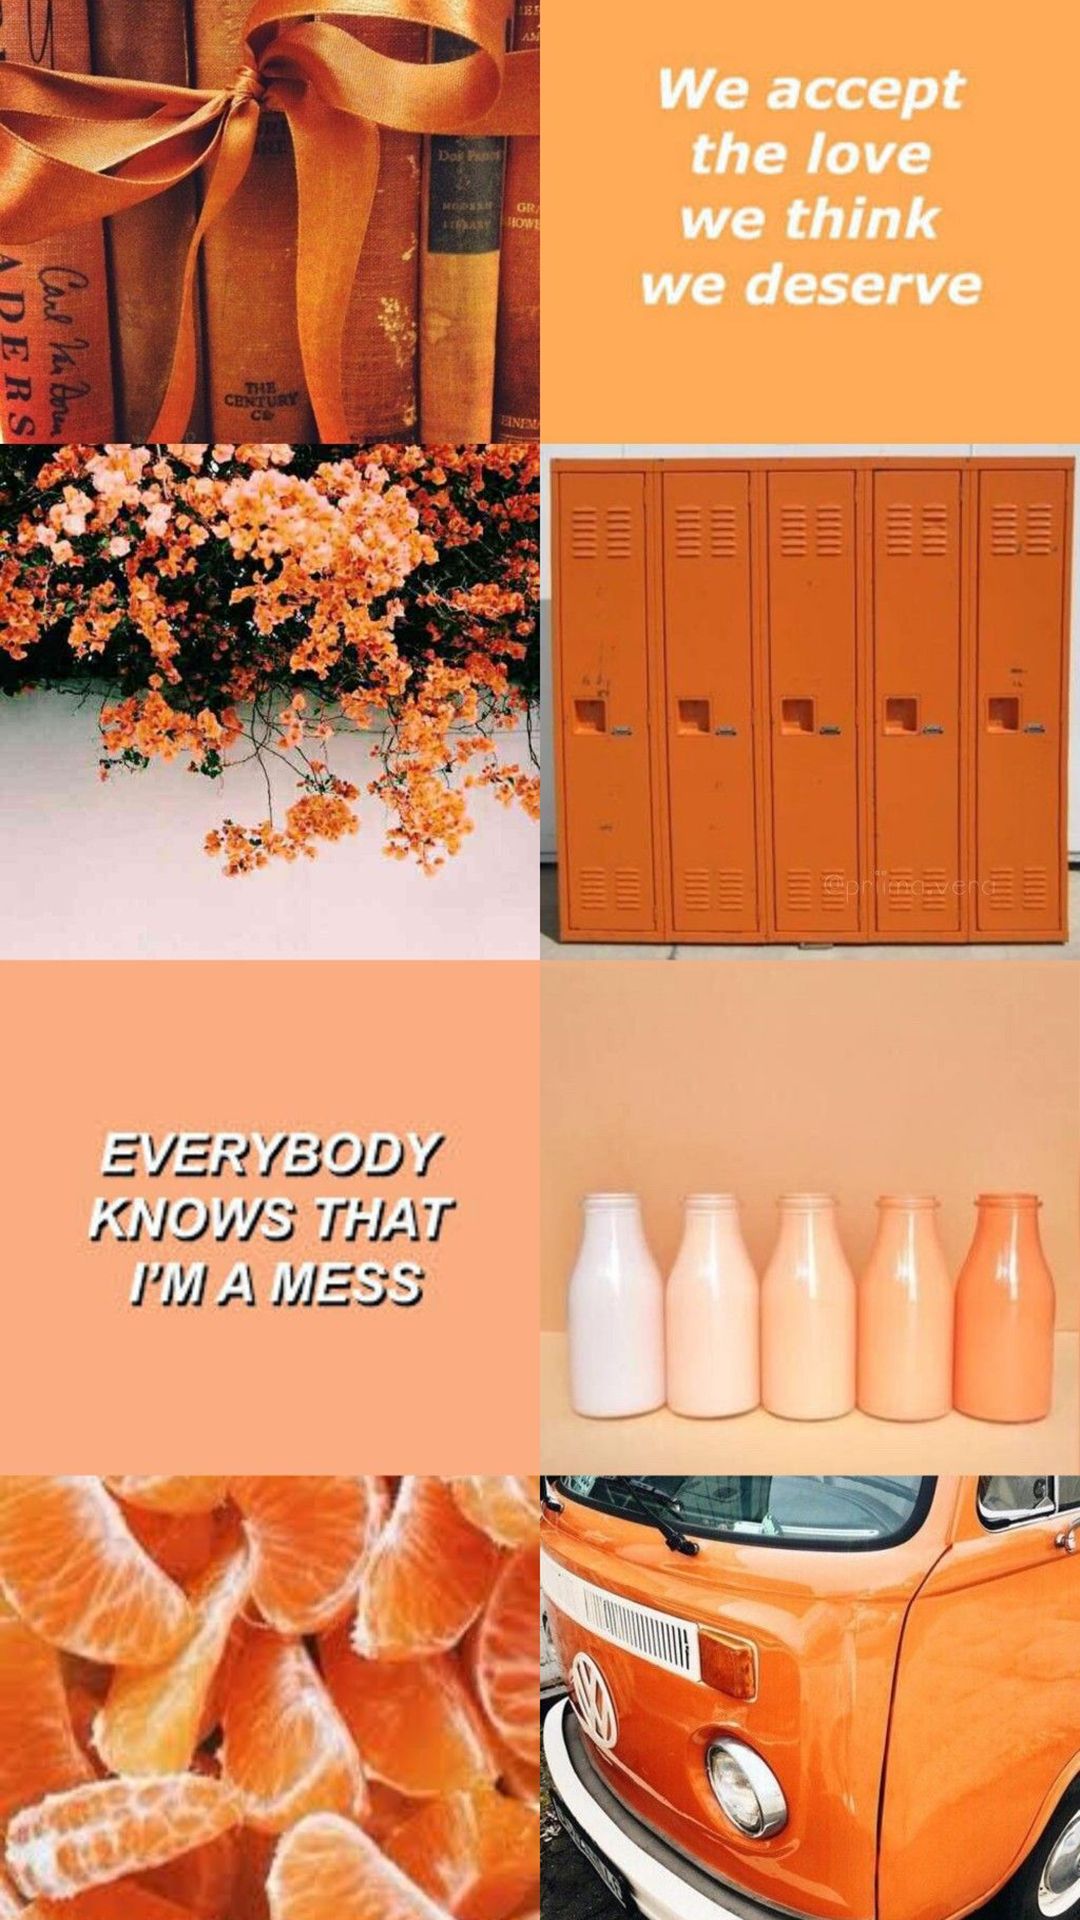 An aesthetic collage of orange and white images including books, flowers, milk cartons, and a car. - Neon orange, orange, collage, pastel orange